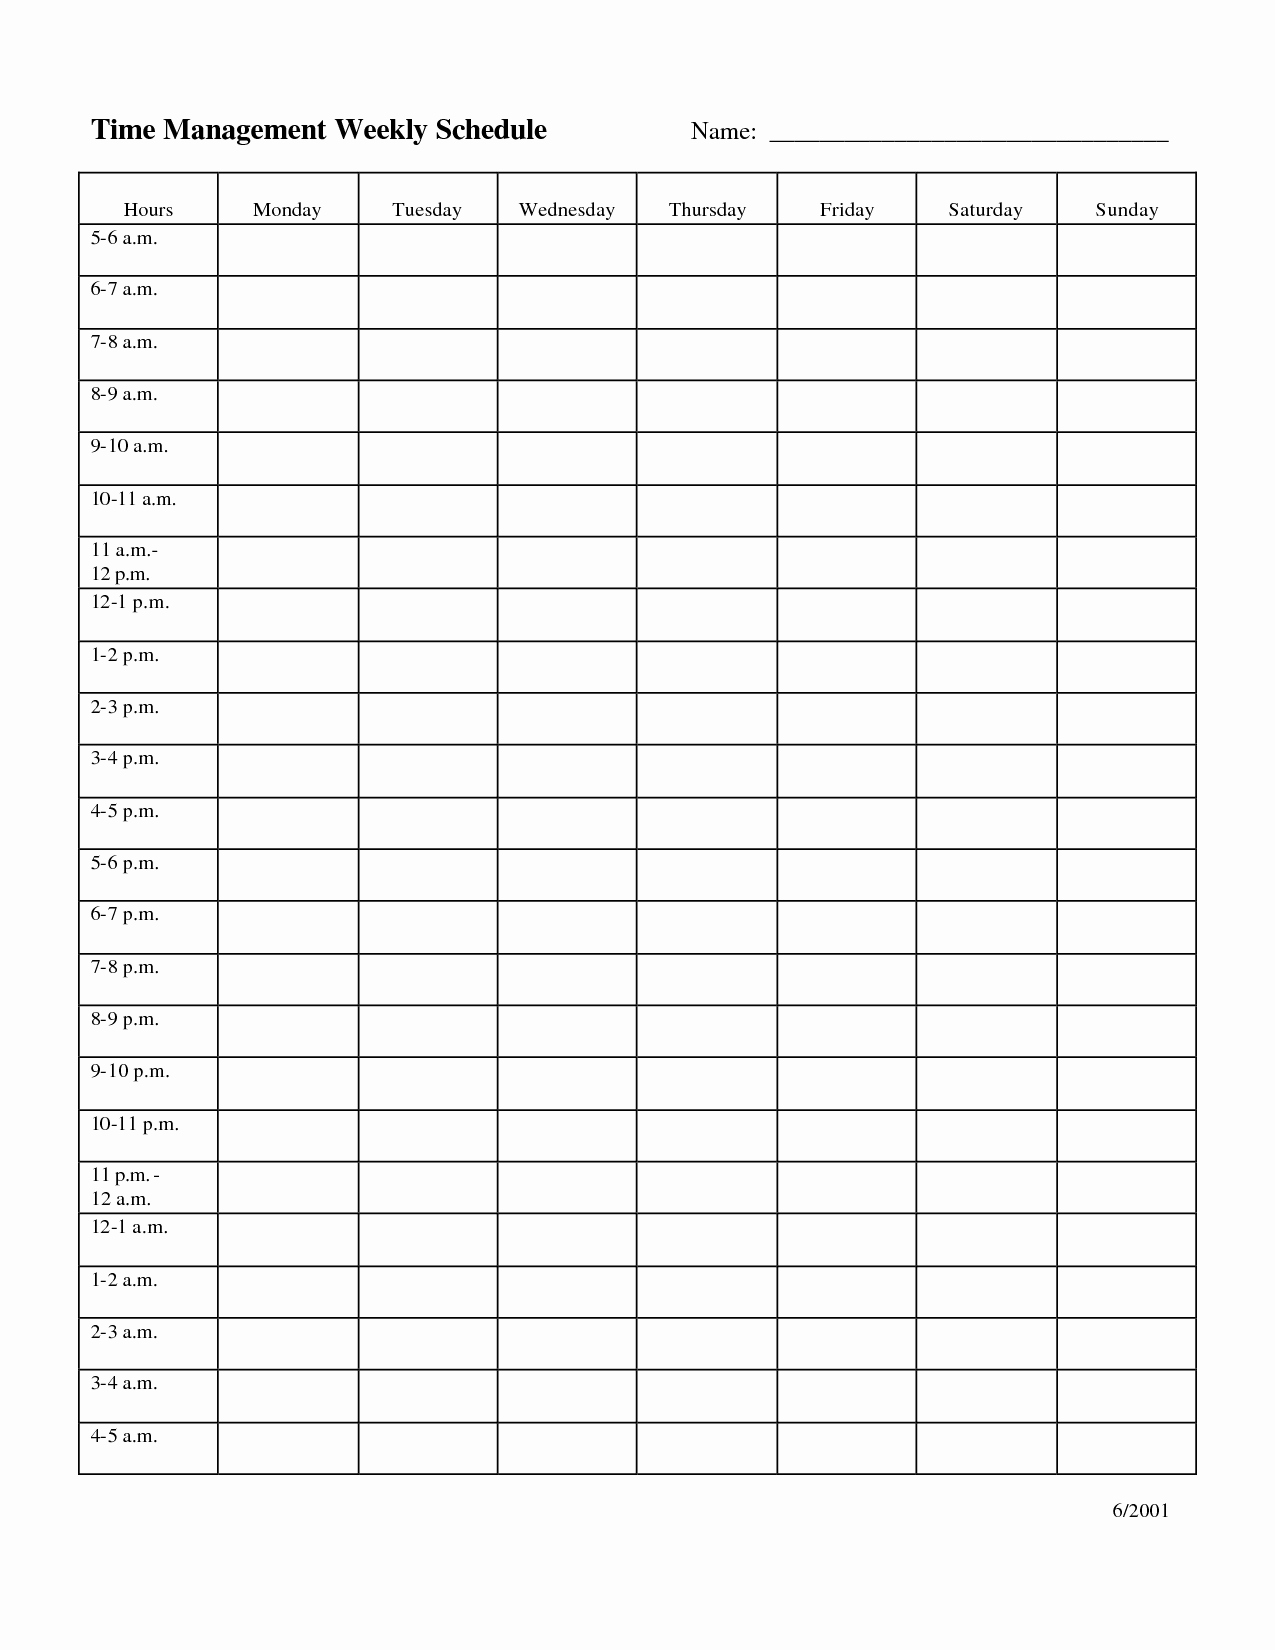 Time Management Weekly Schedule Template …